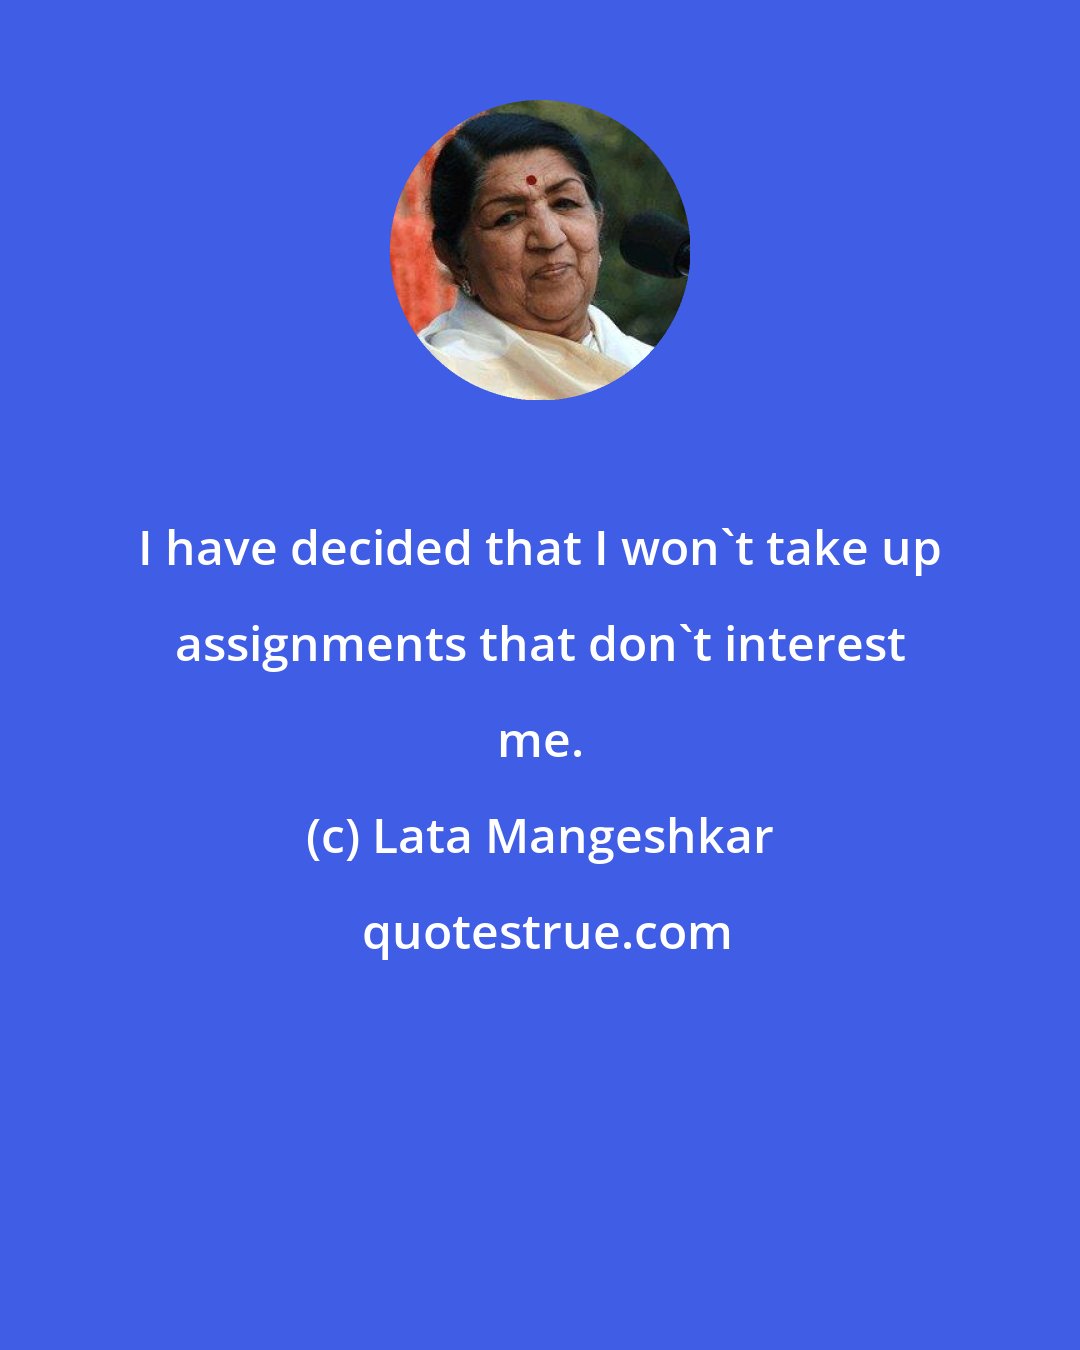 Lata Mangeshkar: I have decided that I won't take up assignments that don't interest me.